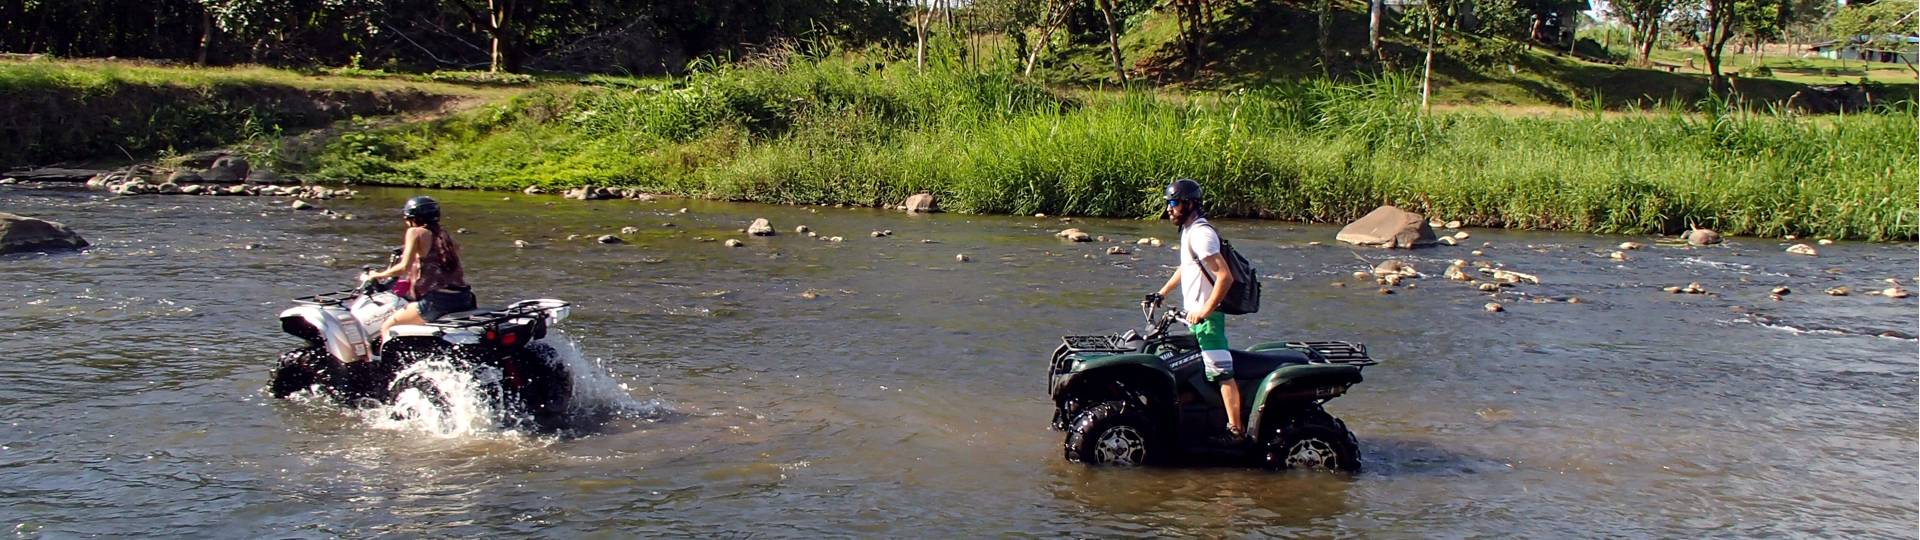 Serendipity Adventures Costa Rica ATV's stop at the river for a quick lunch and swim